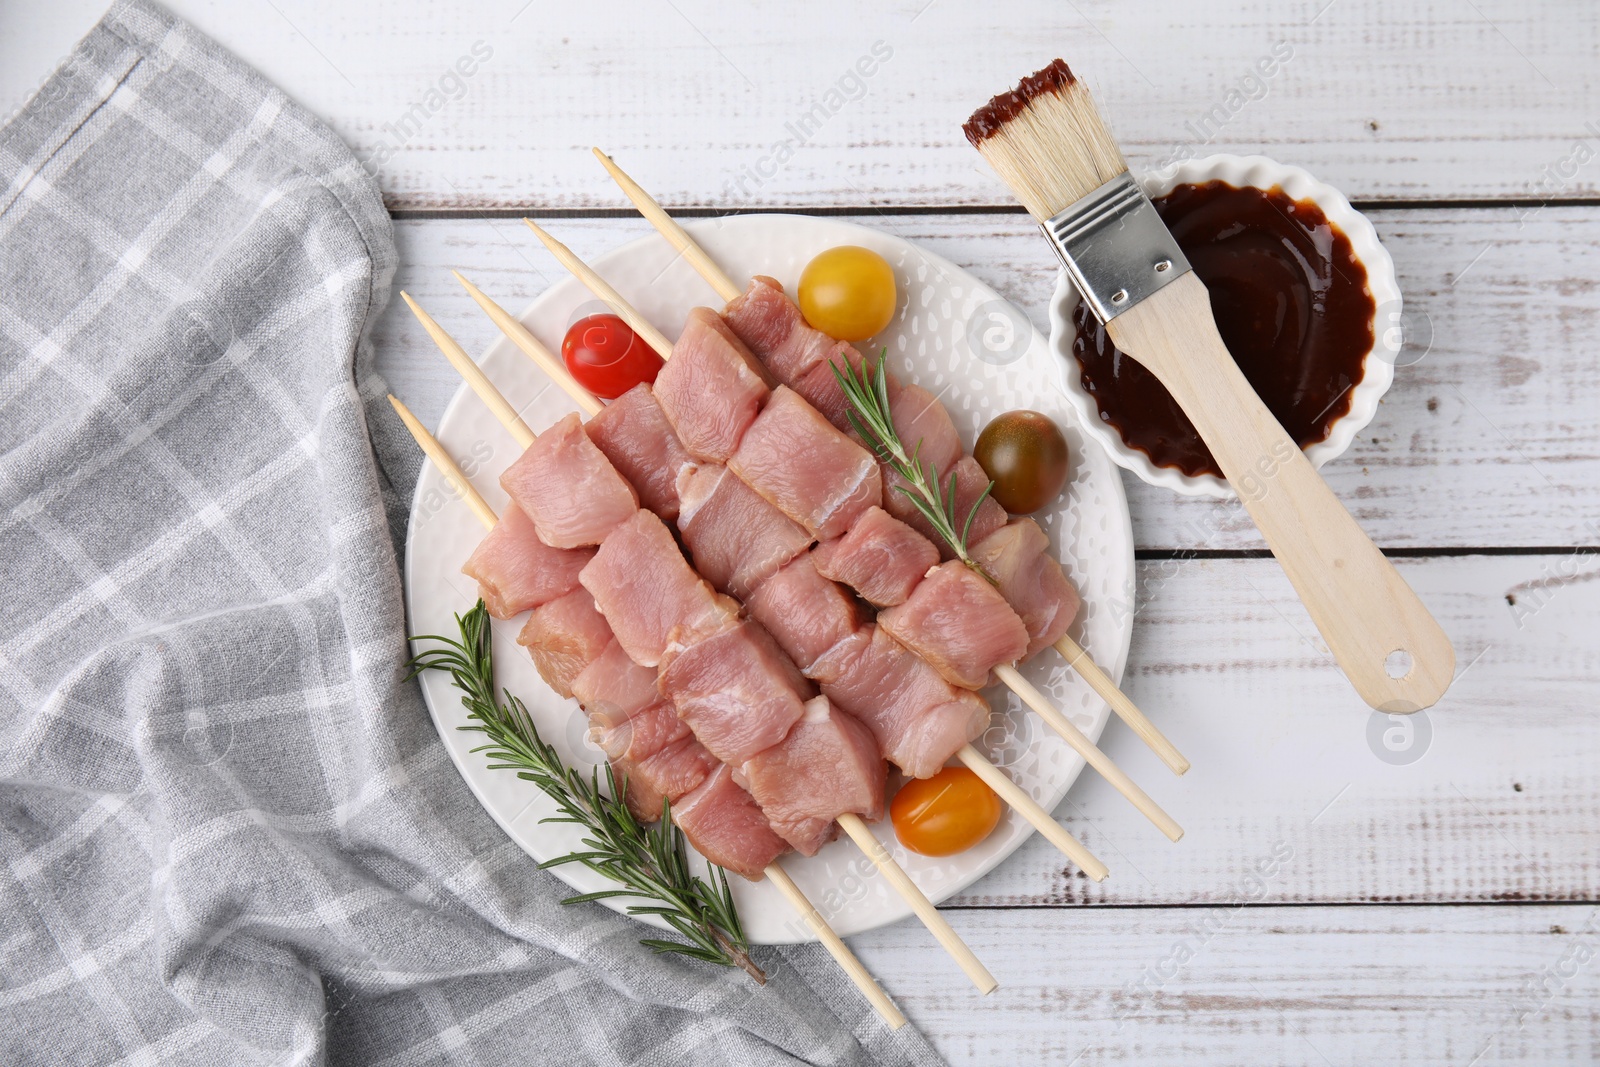 Photo of Skewers with pieces of raw meat, rosemary, tomatoes and marinade on rustic wooden table